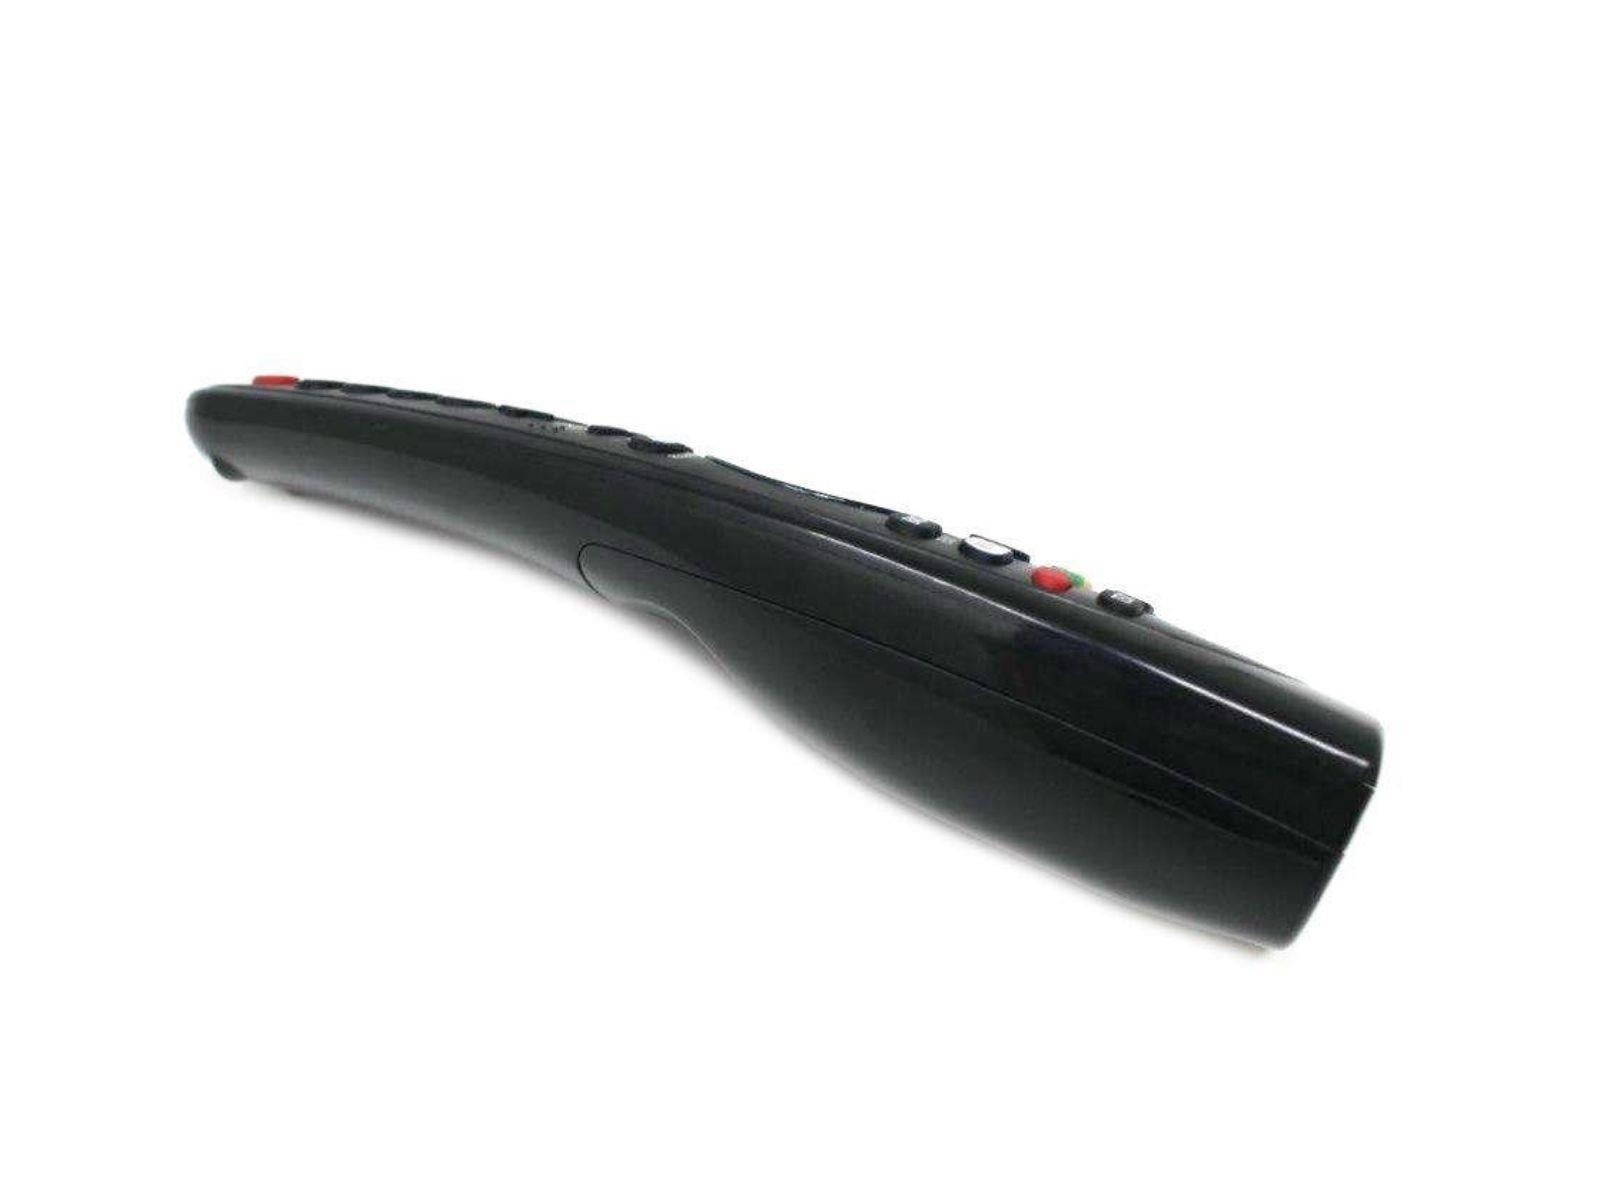 The Tekeir Replacement Remote Control Compatible with LG Universal TVs on its left side